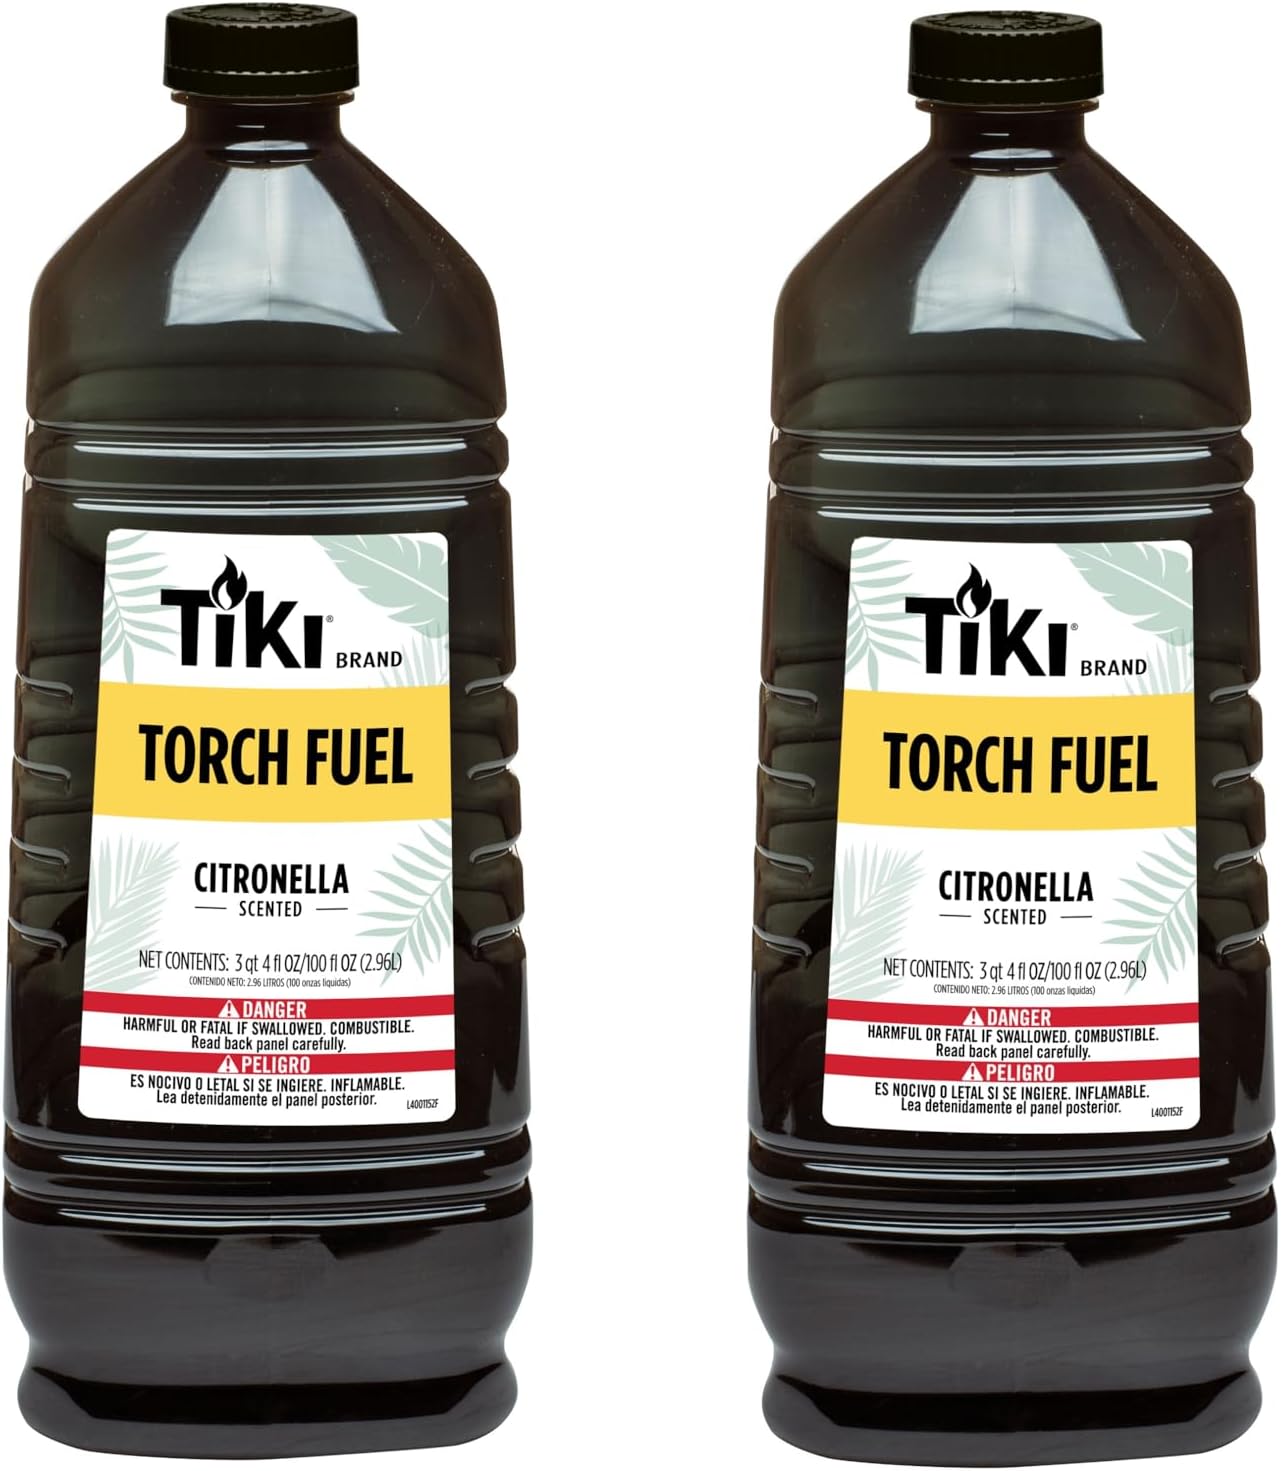 TIKI 100 oz. Citronella Scented Torch Fuel with Easy Pour System (2-Pack)